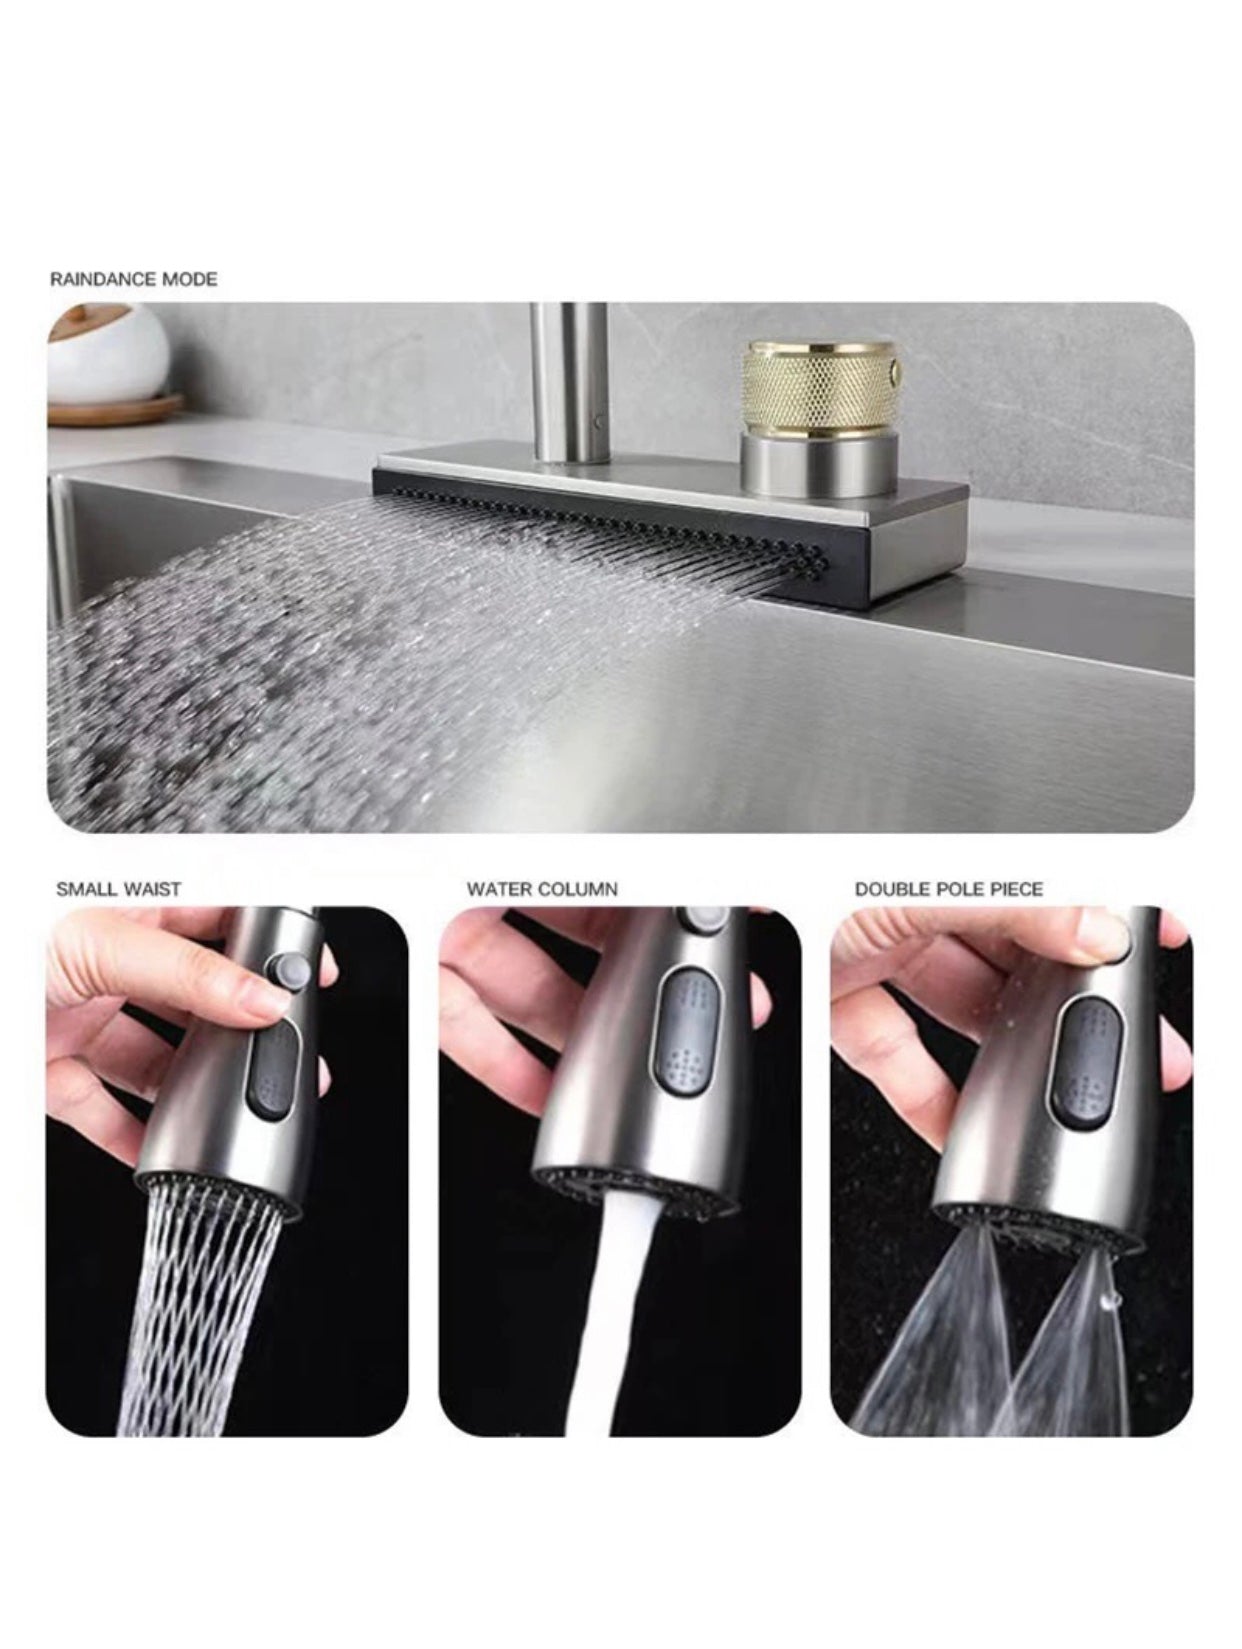 A|M Aquae 304 Stainless Steel Pull-Out Flying Rain Waterfall Single Hole Faucet Outlet (Gunmetal Grey)